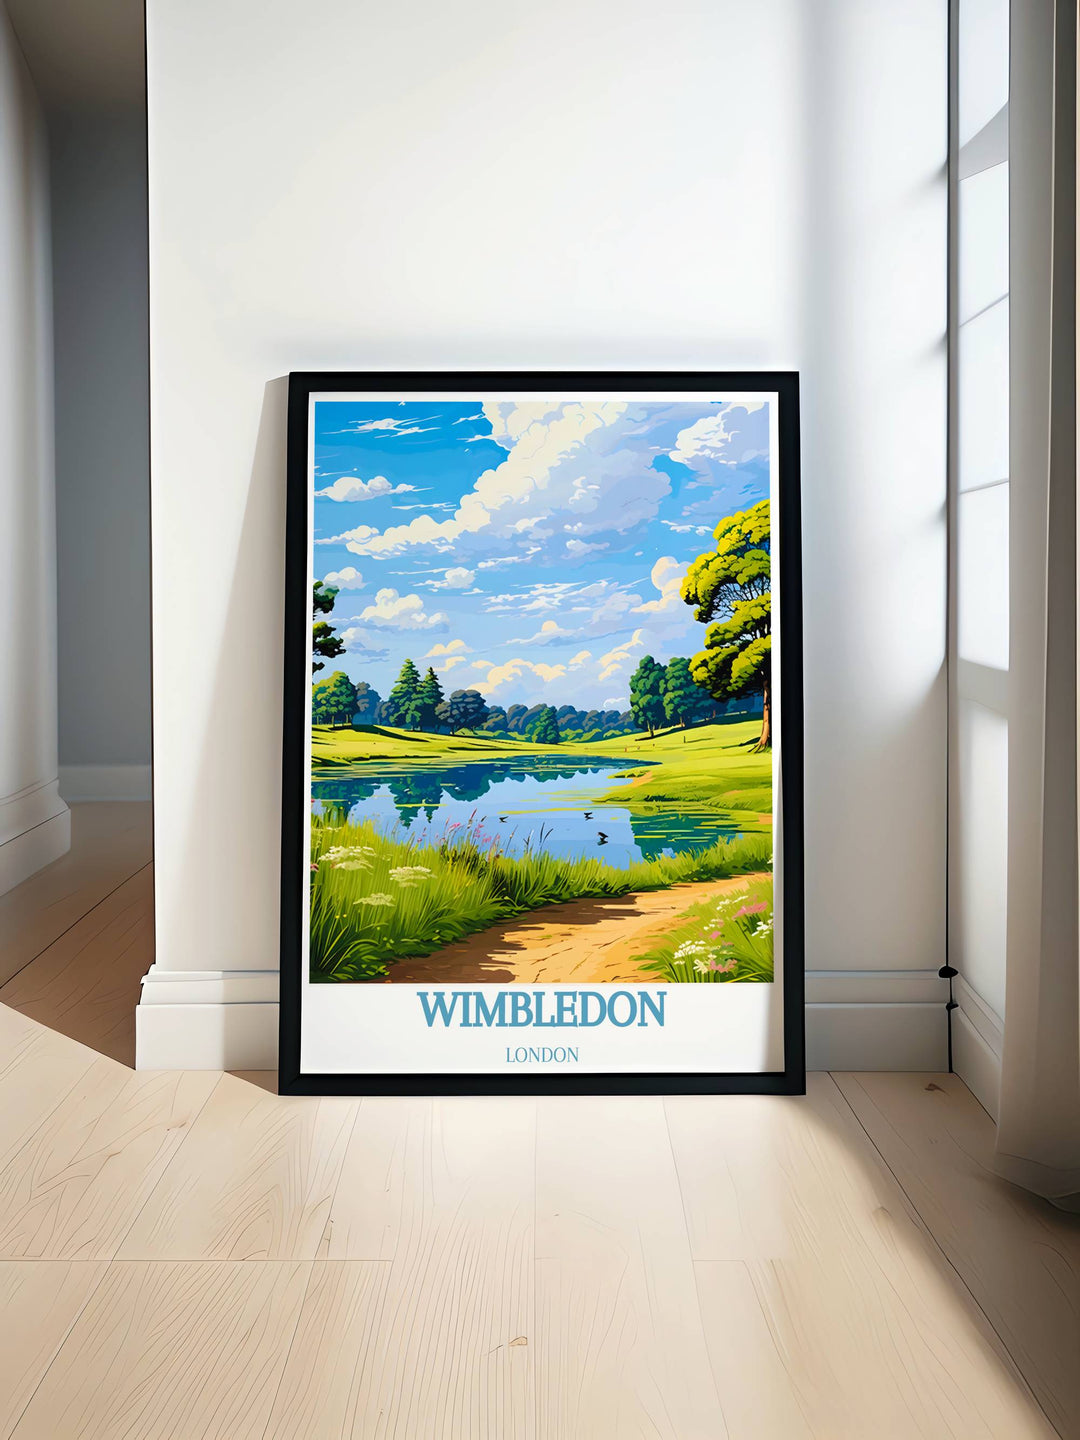 Stunning view of Wimbledon Common with its lush greenery and tranquil paths, capturing the serene beauty of this iconic London location in vibrant detail.